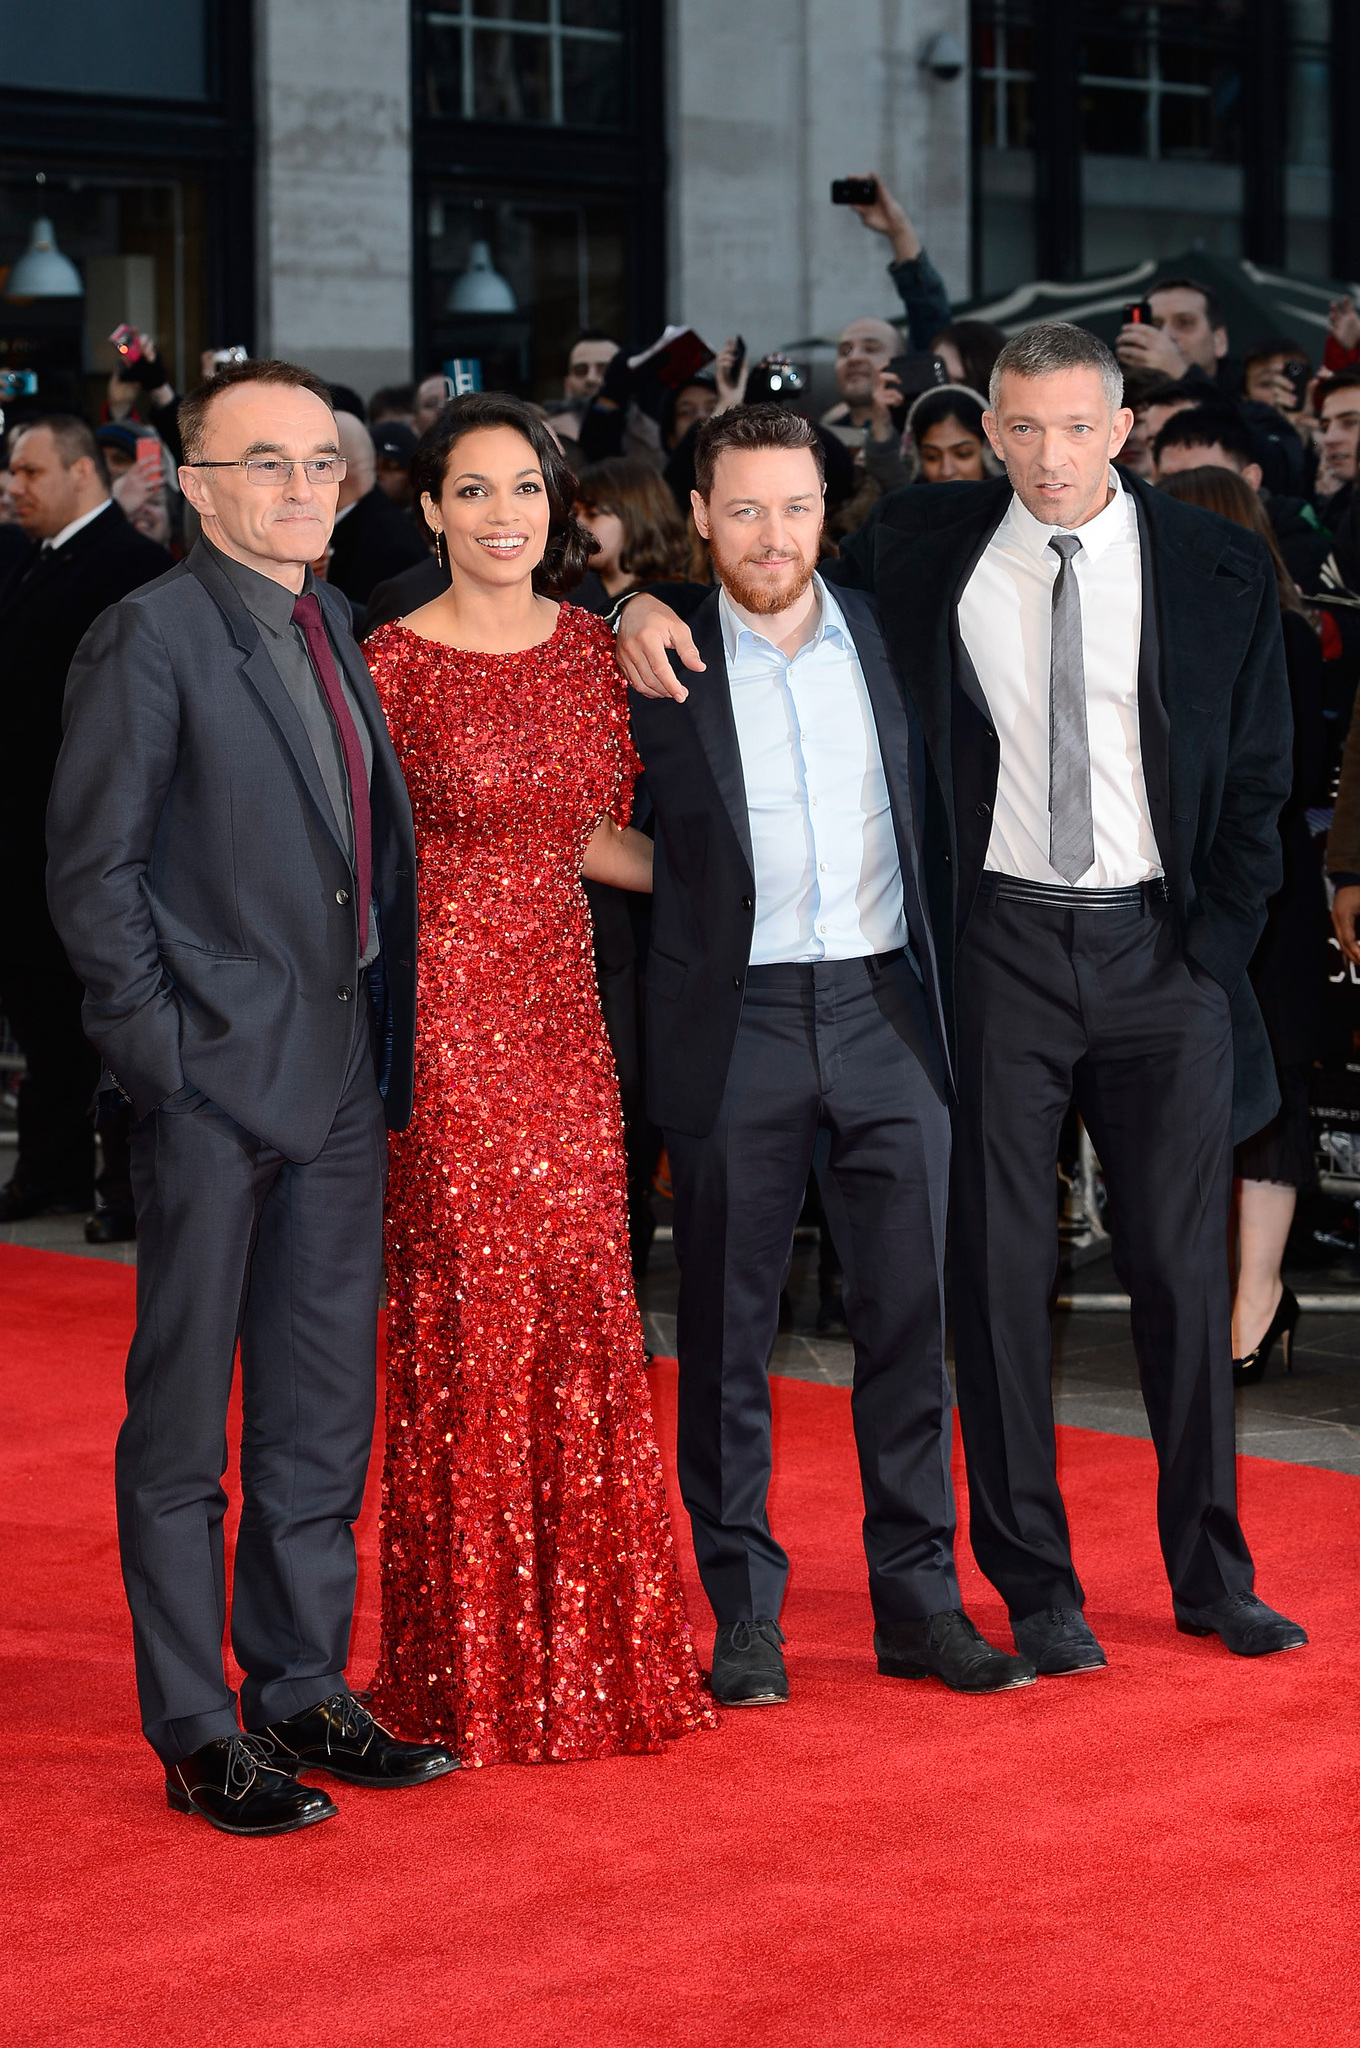 Danny Boyle, Vincent Cassel, Rosario Dawson and James McAvoy at event of Transo busena (2013)